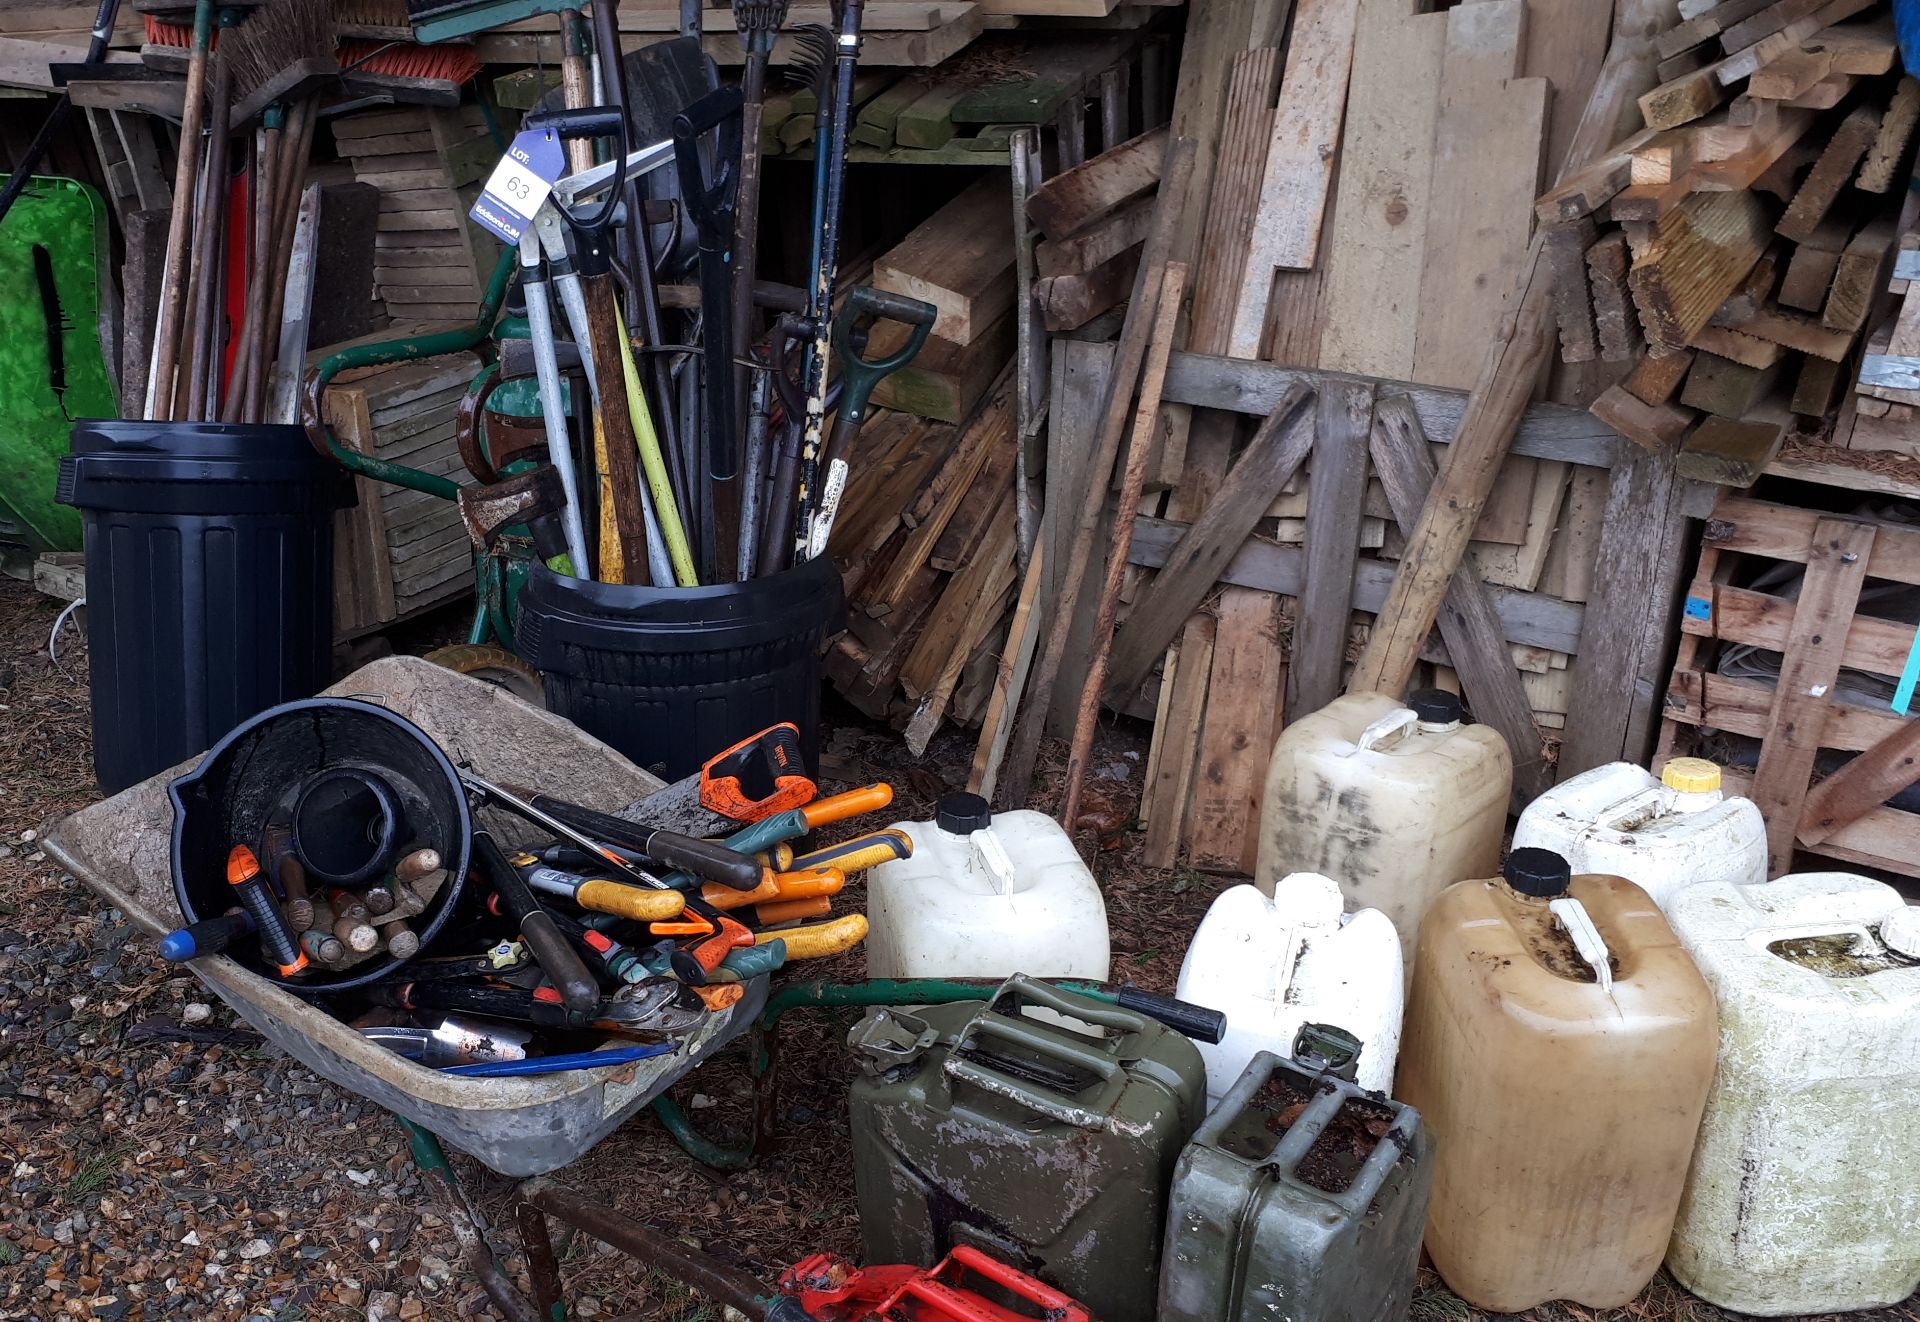 Assortment of handtools, and fuel containers